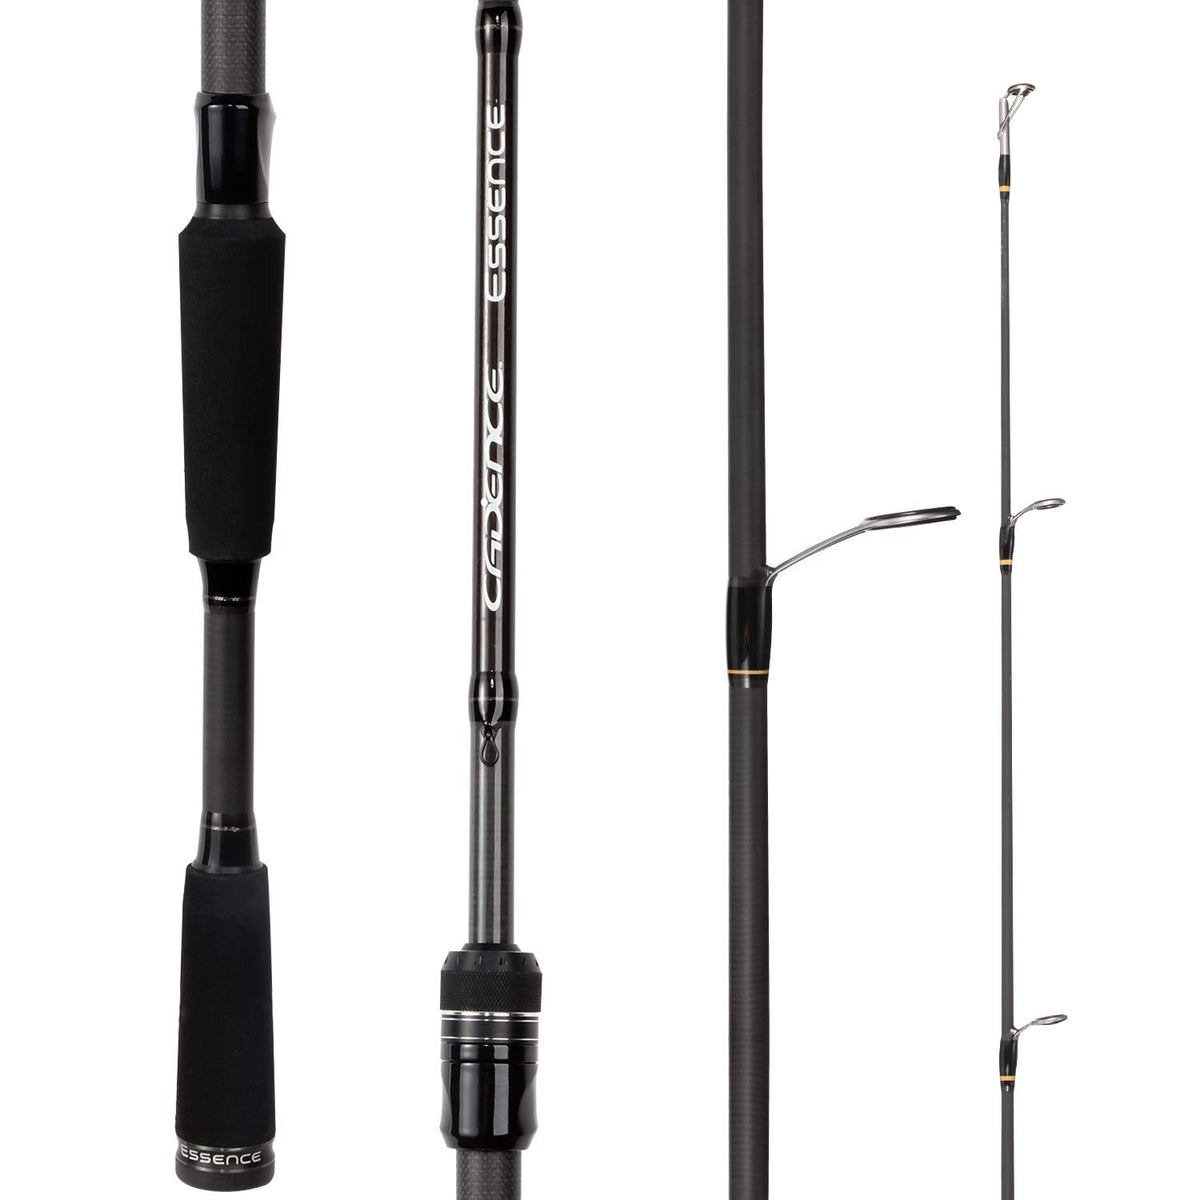 Cadence Fishing CR5 Spinning Rods | 30 Ton Carbon | Fuji Reel Seat |  Stainless Steel Guides with SiC Inserts | Full Assortment of Lengths,  Actions and